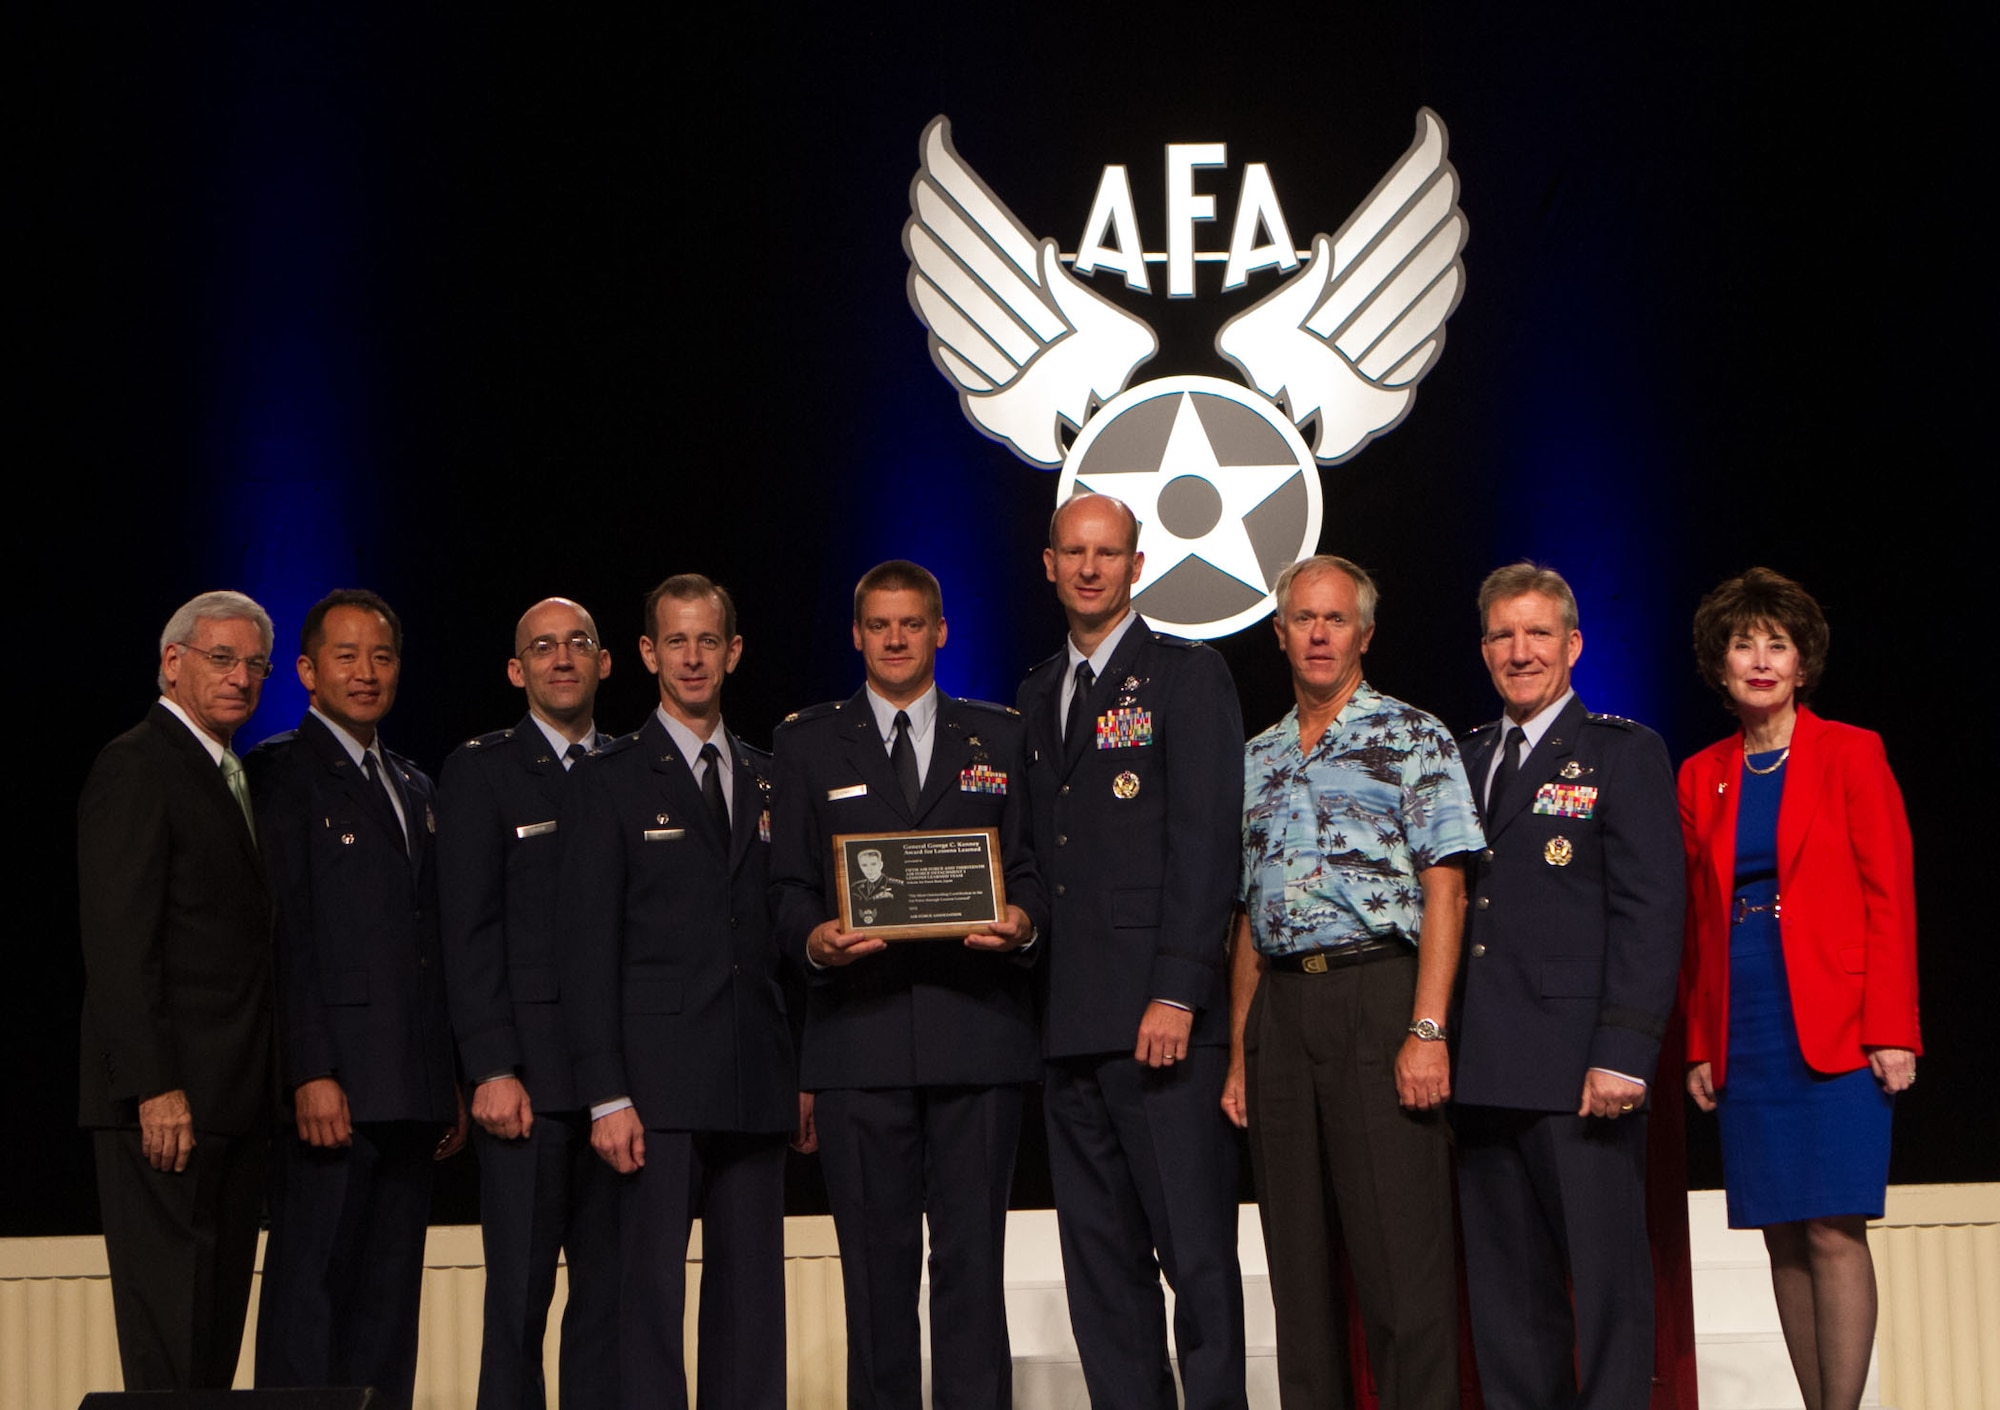 Left to right, Mr. Sandy Schlitt, Air Force Association Chairman of the Board, Col. Stuart Lum, then-5th Air Force Director of Staff, Lt. Col. Kyle Novak, then-13th Air Force Chief of Analyses and Assessments, Col. Marc Reese, then-13th AF Detachment 1 commander, Maj. David Caswell, then-7th Air Force A8/A9, Col. Martin Winkler, 5th AF A3/A5, Mr. Mark Reid, FFRDC-MITRE, 13th AF/A9, Gen. Herbert "Hawk" Carlisle, Pacific Air Forces commander, and Dr. Jacqueline Henningsen, director for Studies & Analyses, Assessments and Lessons Learned, Headquarters U.S. Air Force, pose with the Gen. George C. Kenney Award for Lessons Learned during the AFA Air and Space and Technology Exposition Sept. 17, 2012 in Washington, D.C. (Courtesy photo)